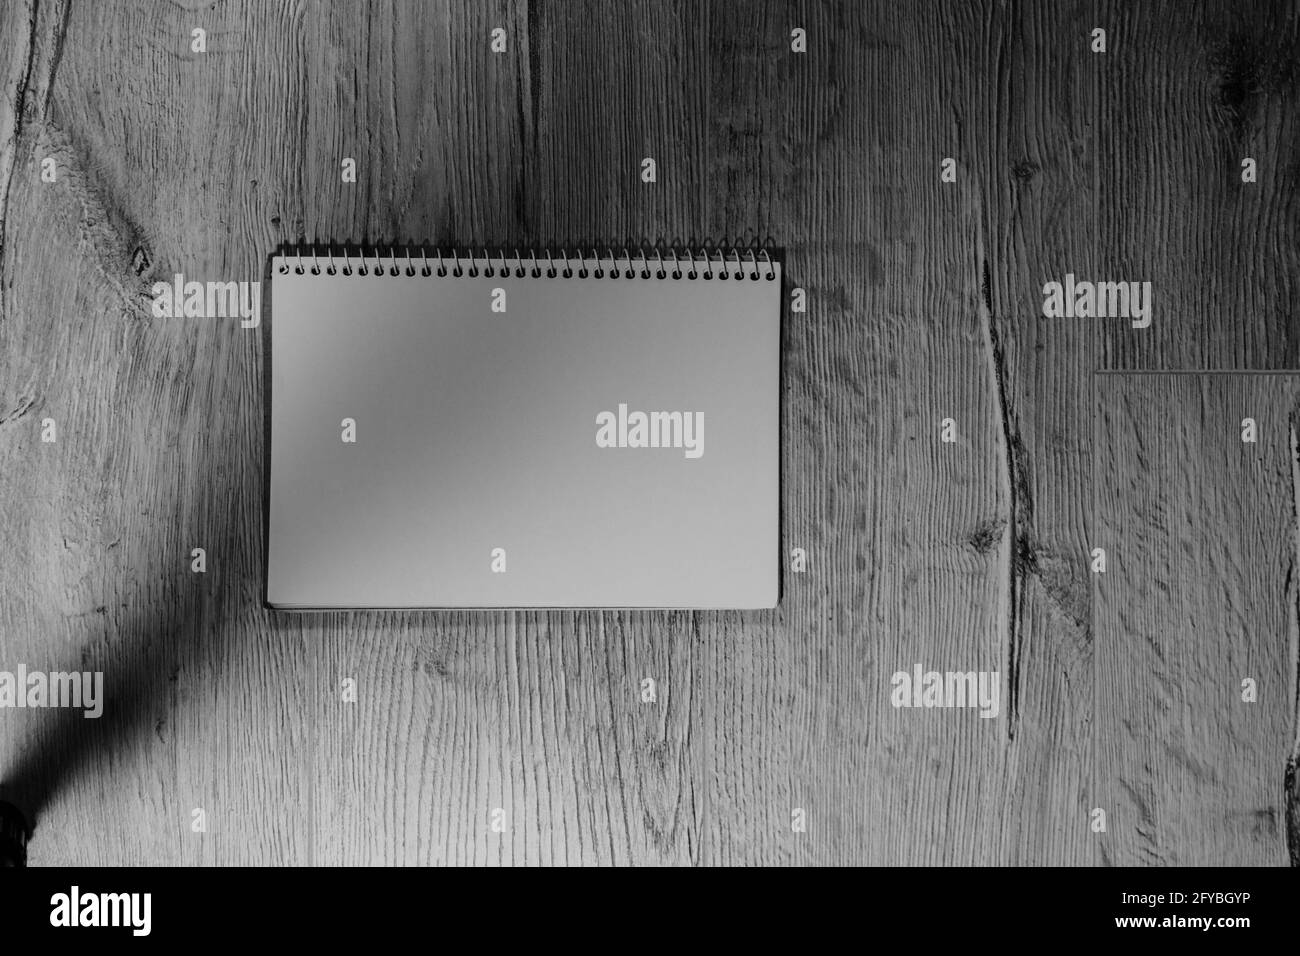 The notebook is located horizontally on a wooden background. Black and white photo. Stock Photo